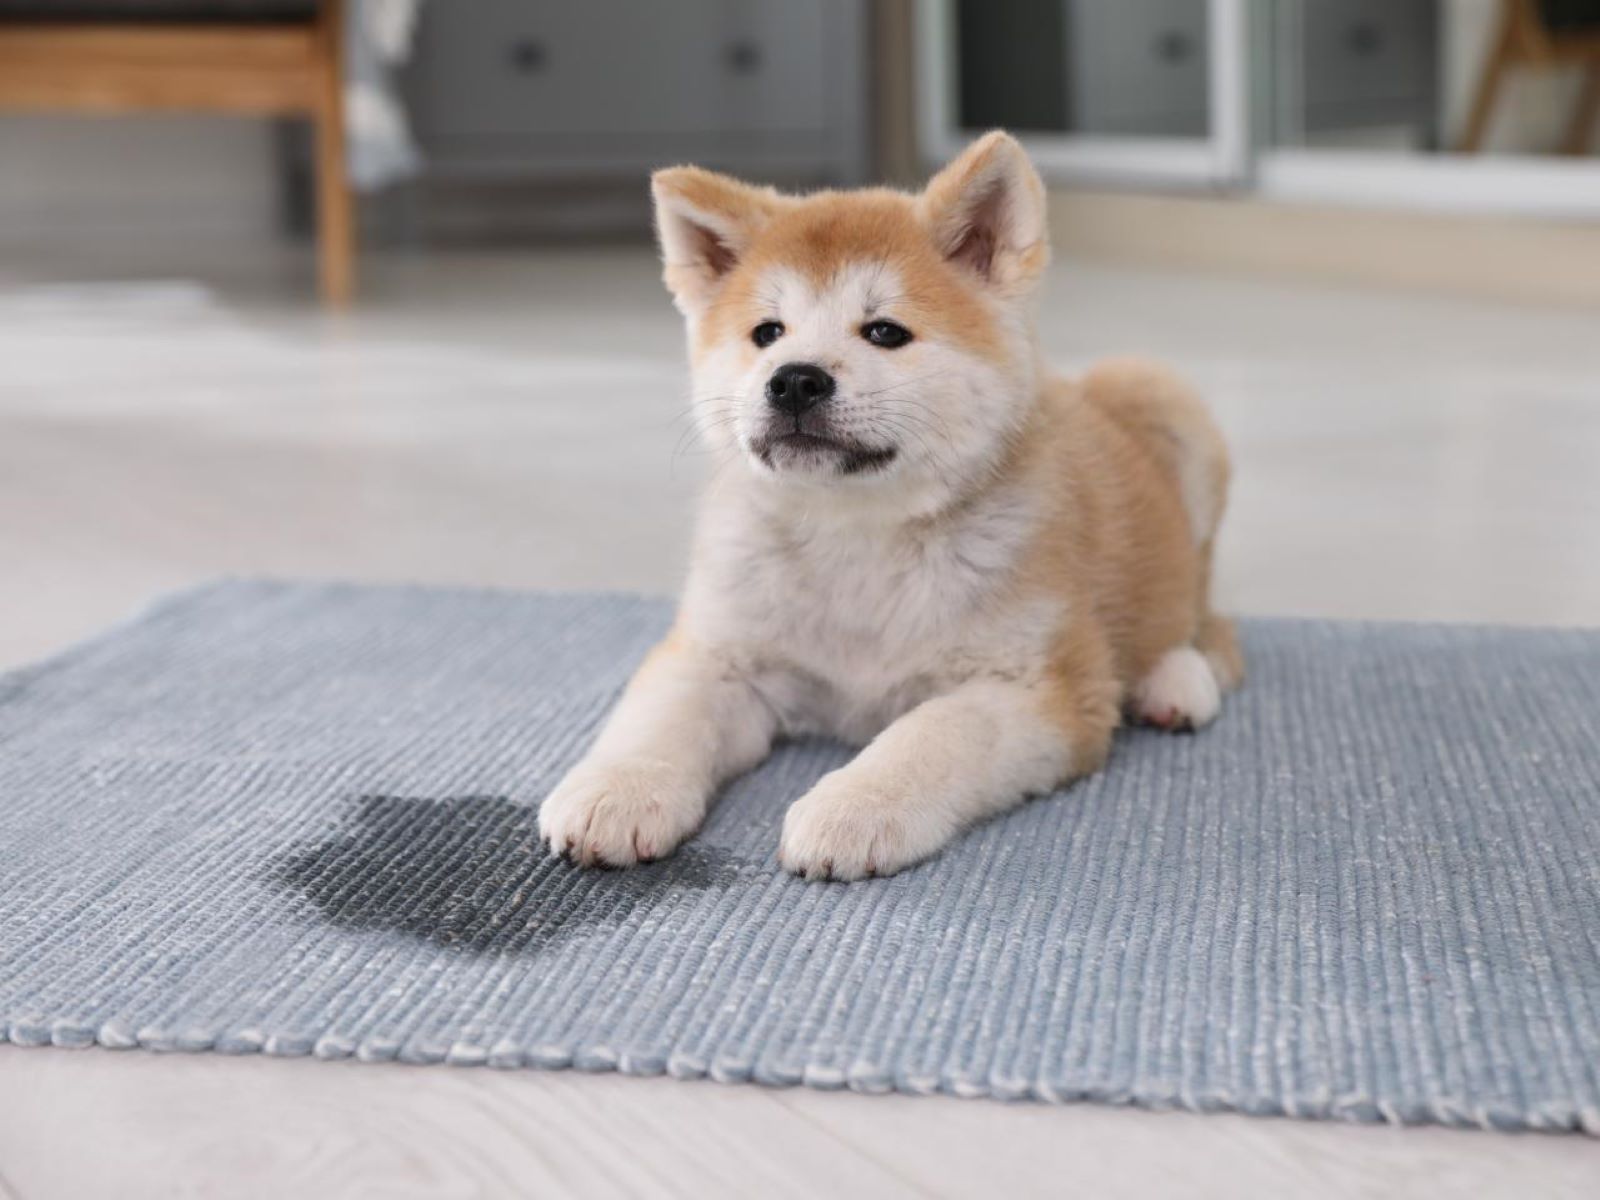 How To Clean Pee Out Of A Carpet